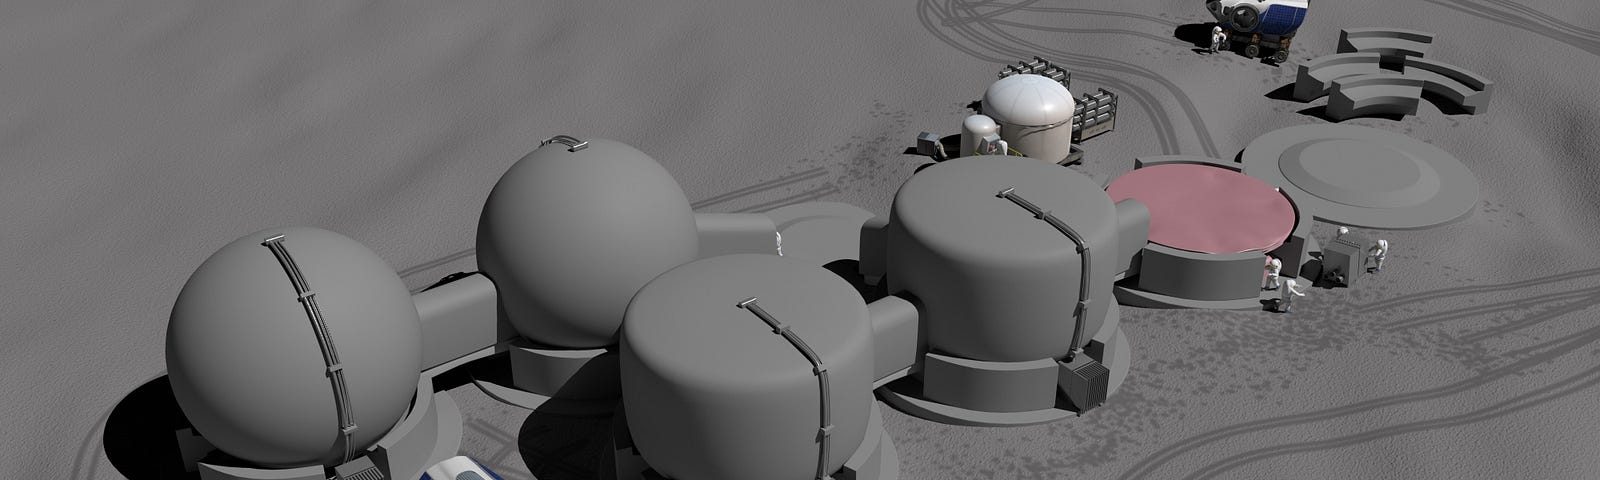 The Regishell concept proposes inflatable human habitat structures that can be inflated on-site, then rigidized using abundant local regolith as a construction material.